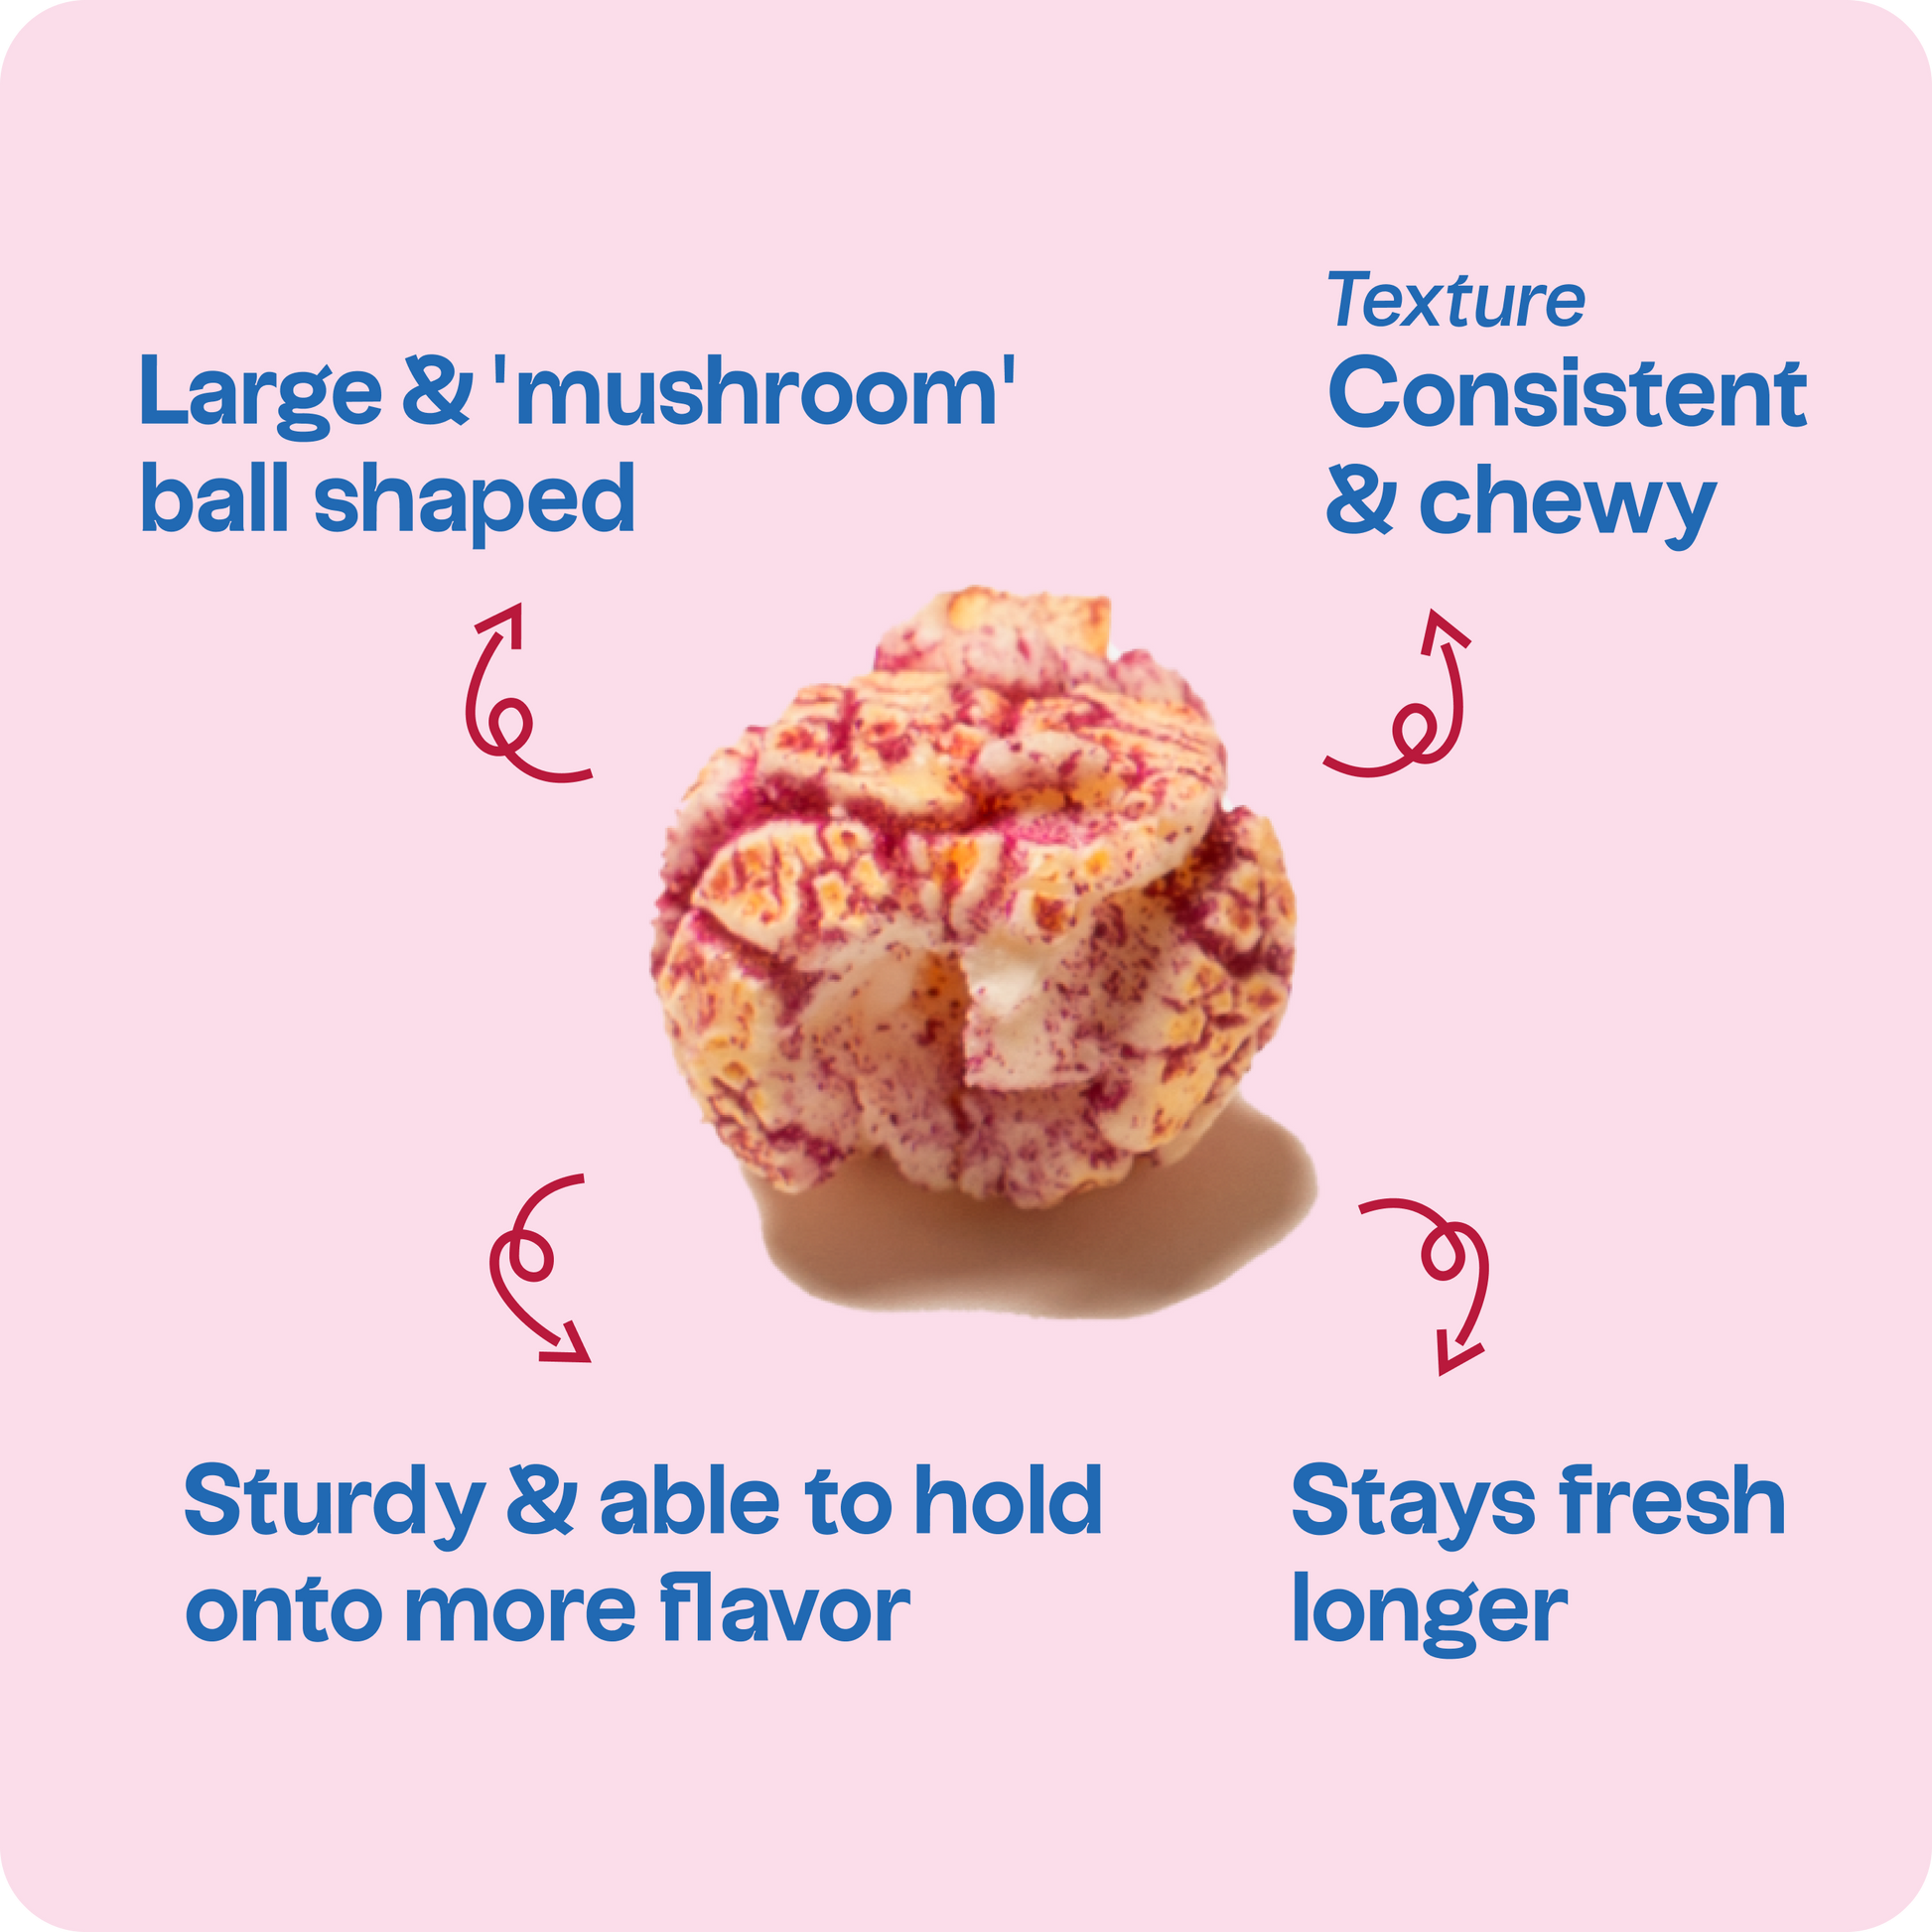 A large single bulbous popcorn fills the center of the frame. Shape and size gives it a great consistent & chewy texture, allows it hold onto more flavor and stays fresh longer